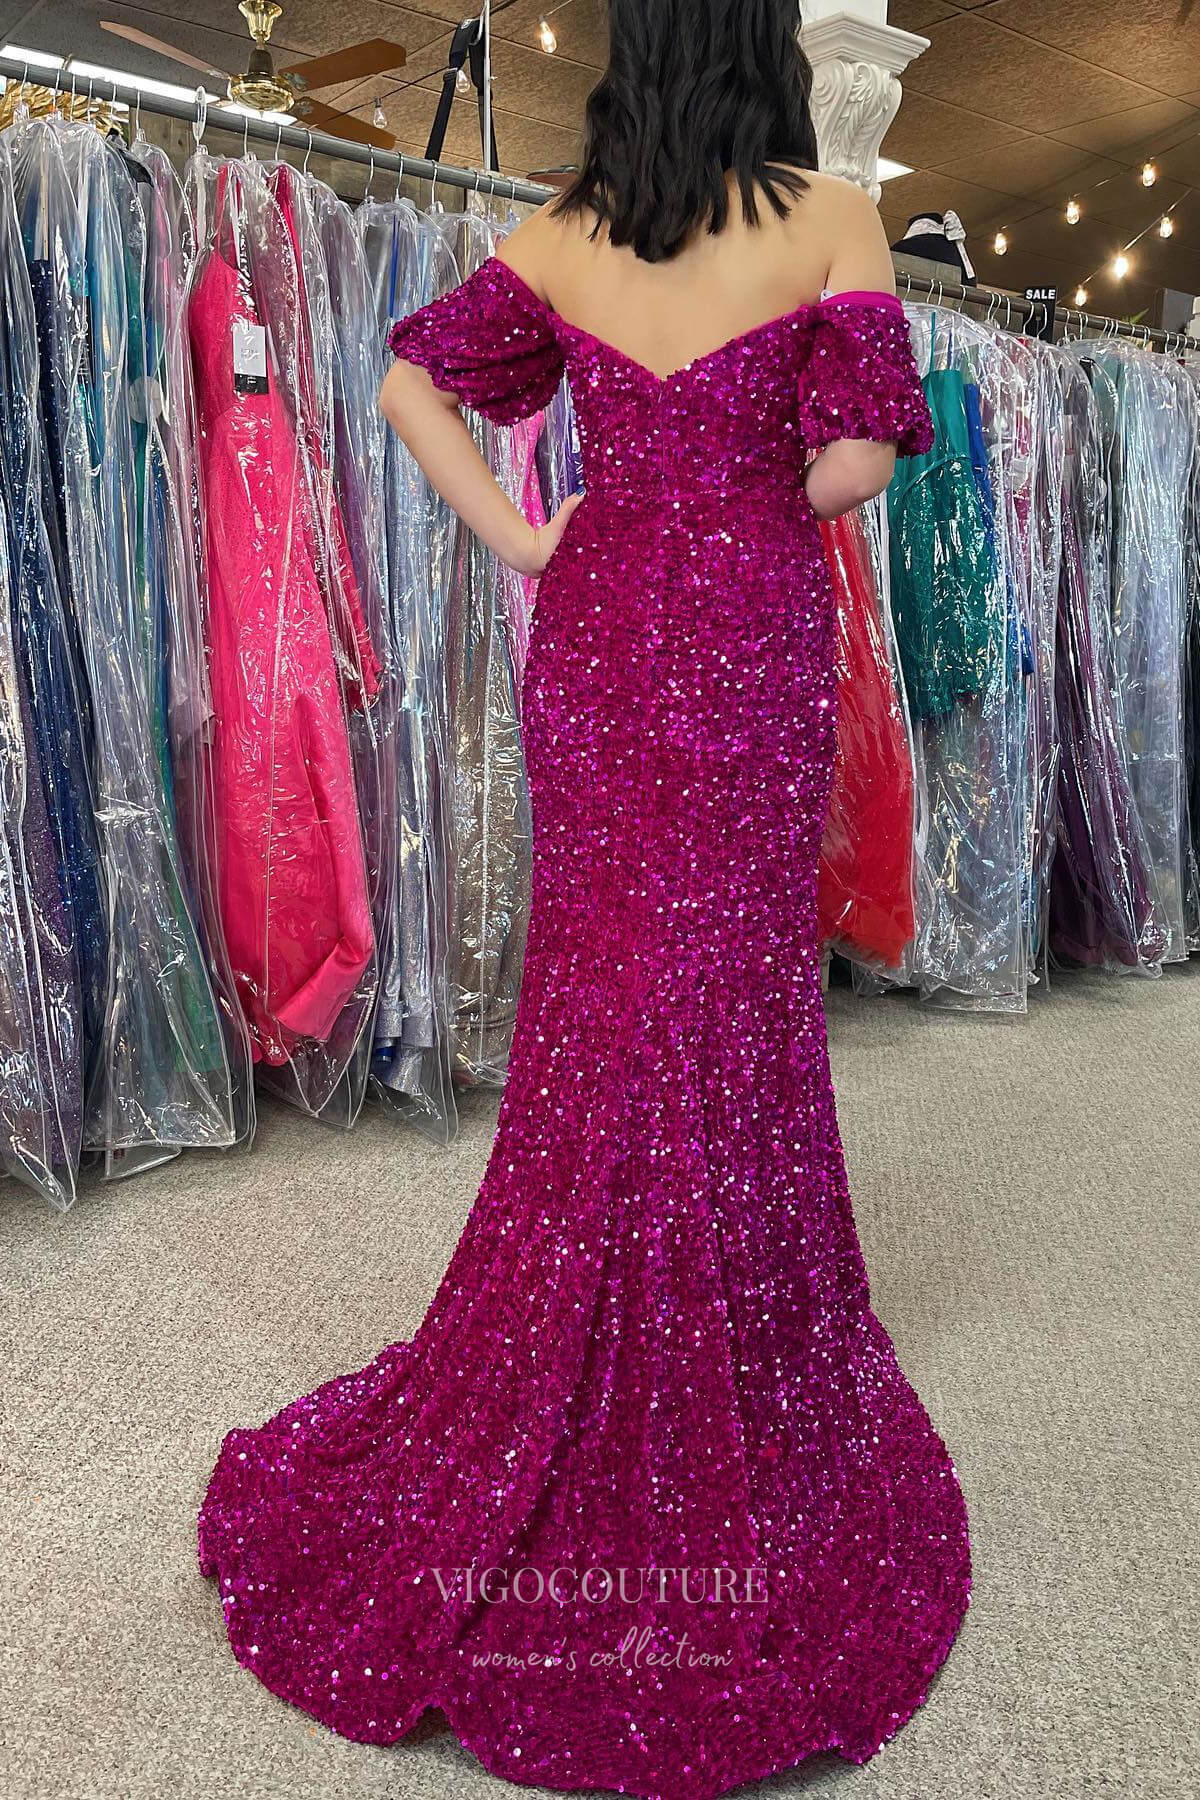 Off the Shoulder Sequin Prom Dresses with Slit Mermaid Evening Dress 21797-Prom Dresses-vigocouture-Burgundy-US2-vigocouture